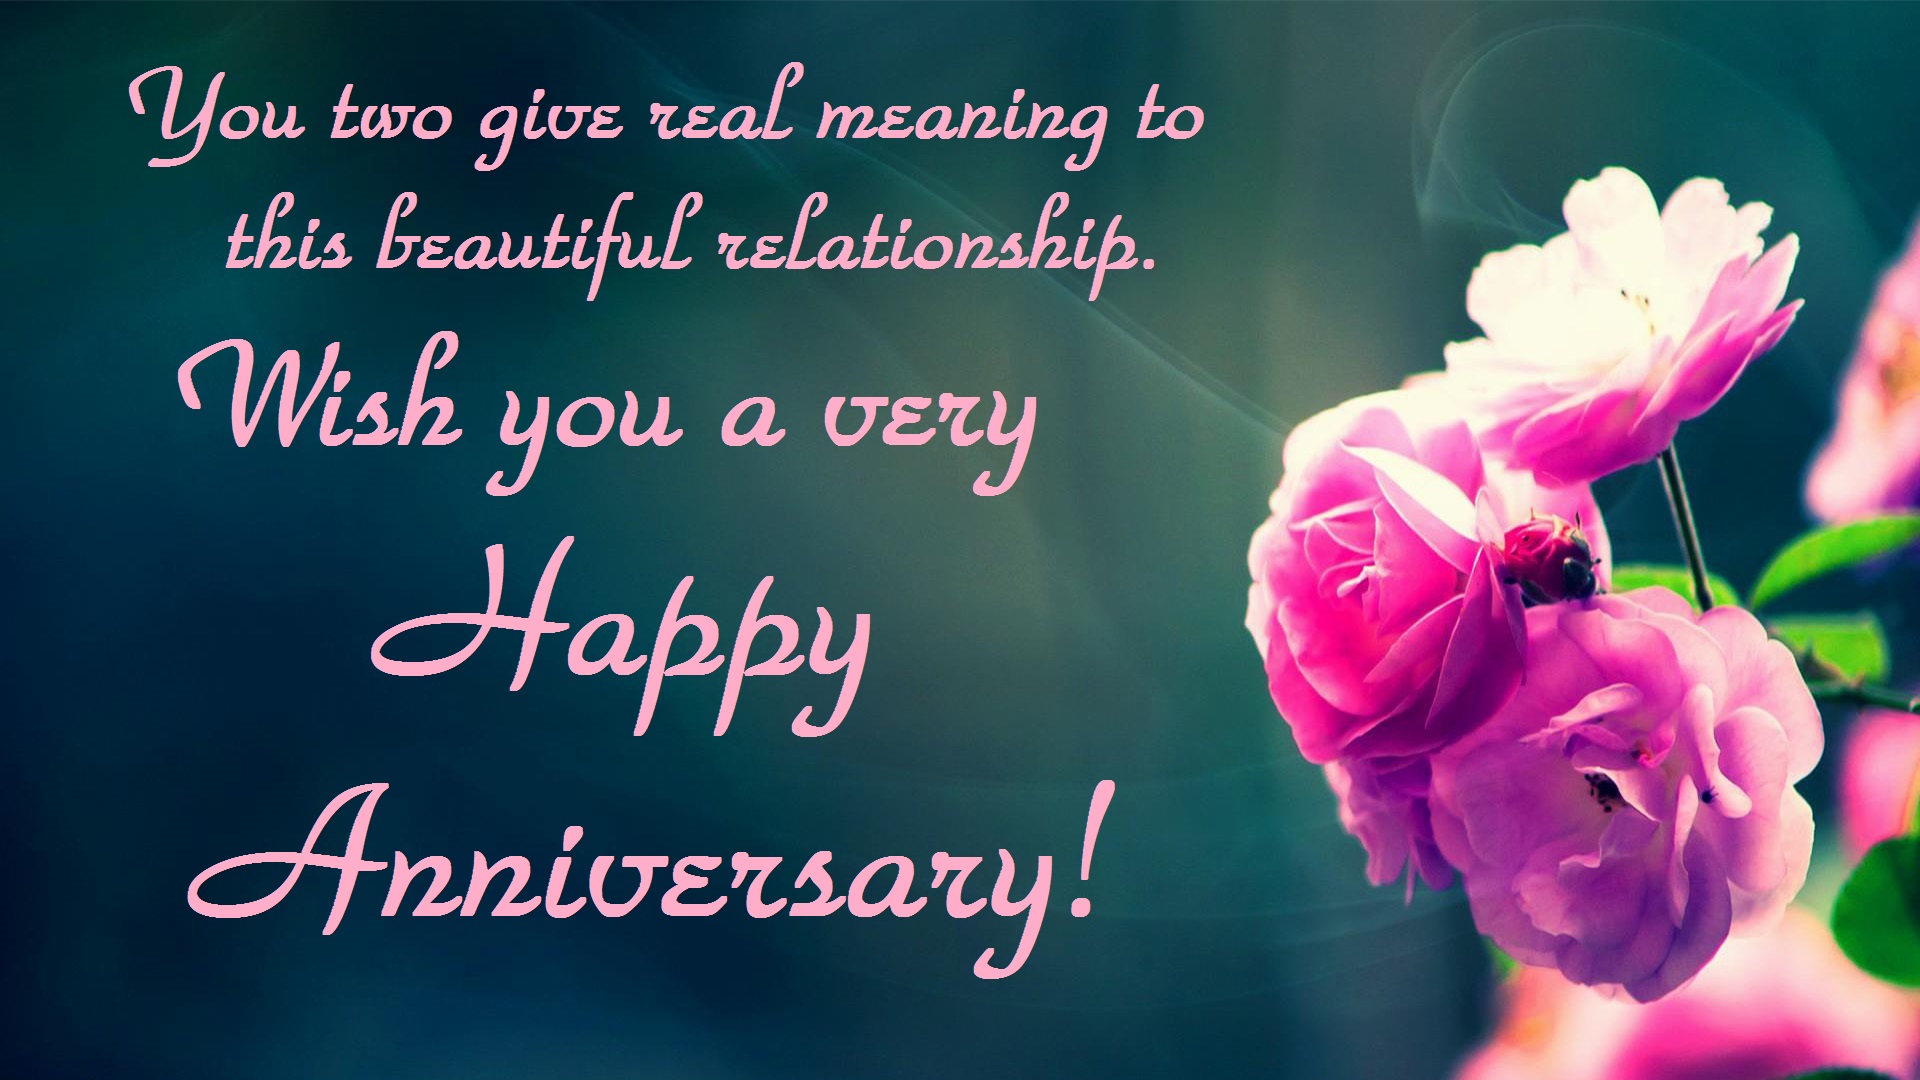 Happy Wedding Anniversary Wishes For a Couple